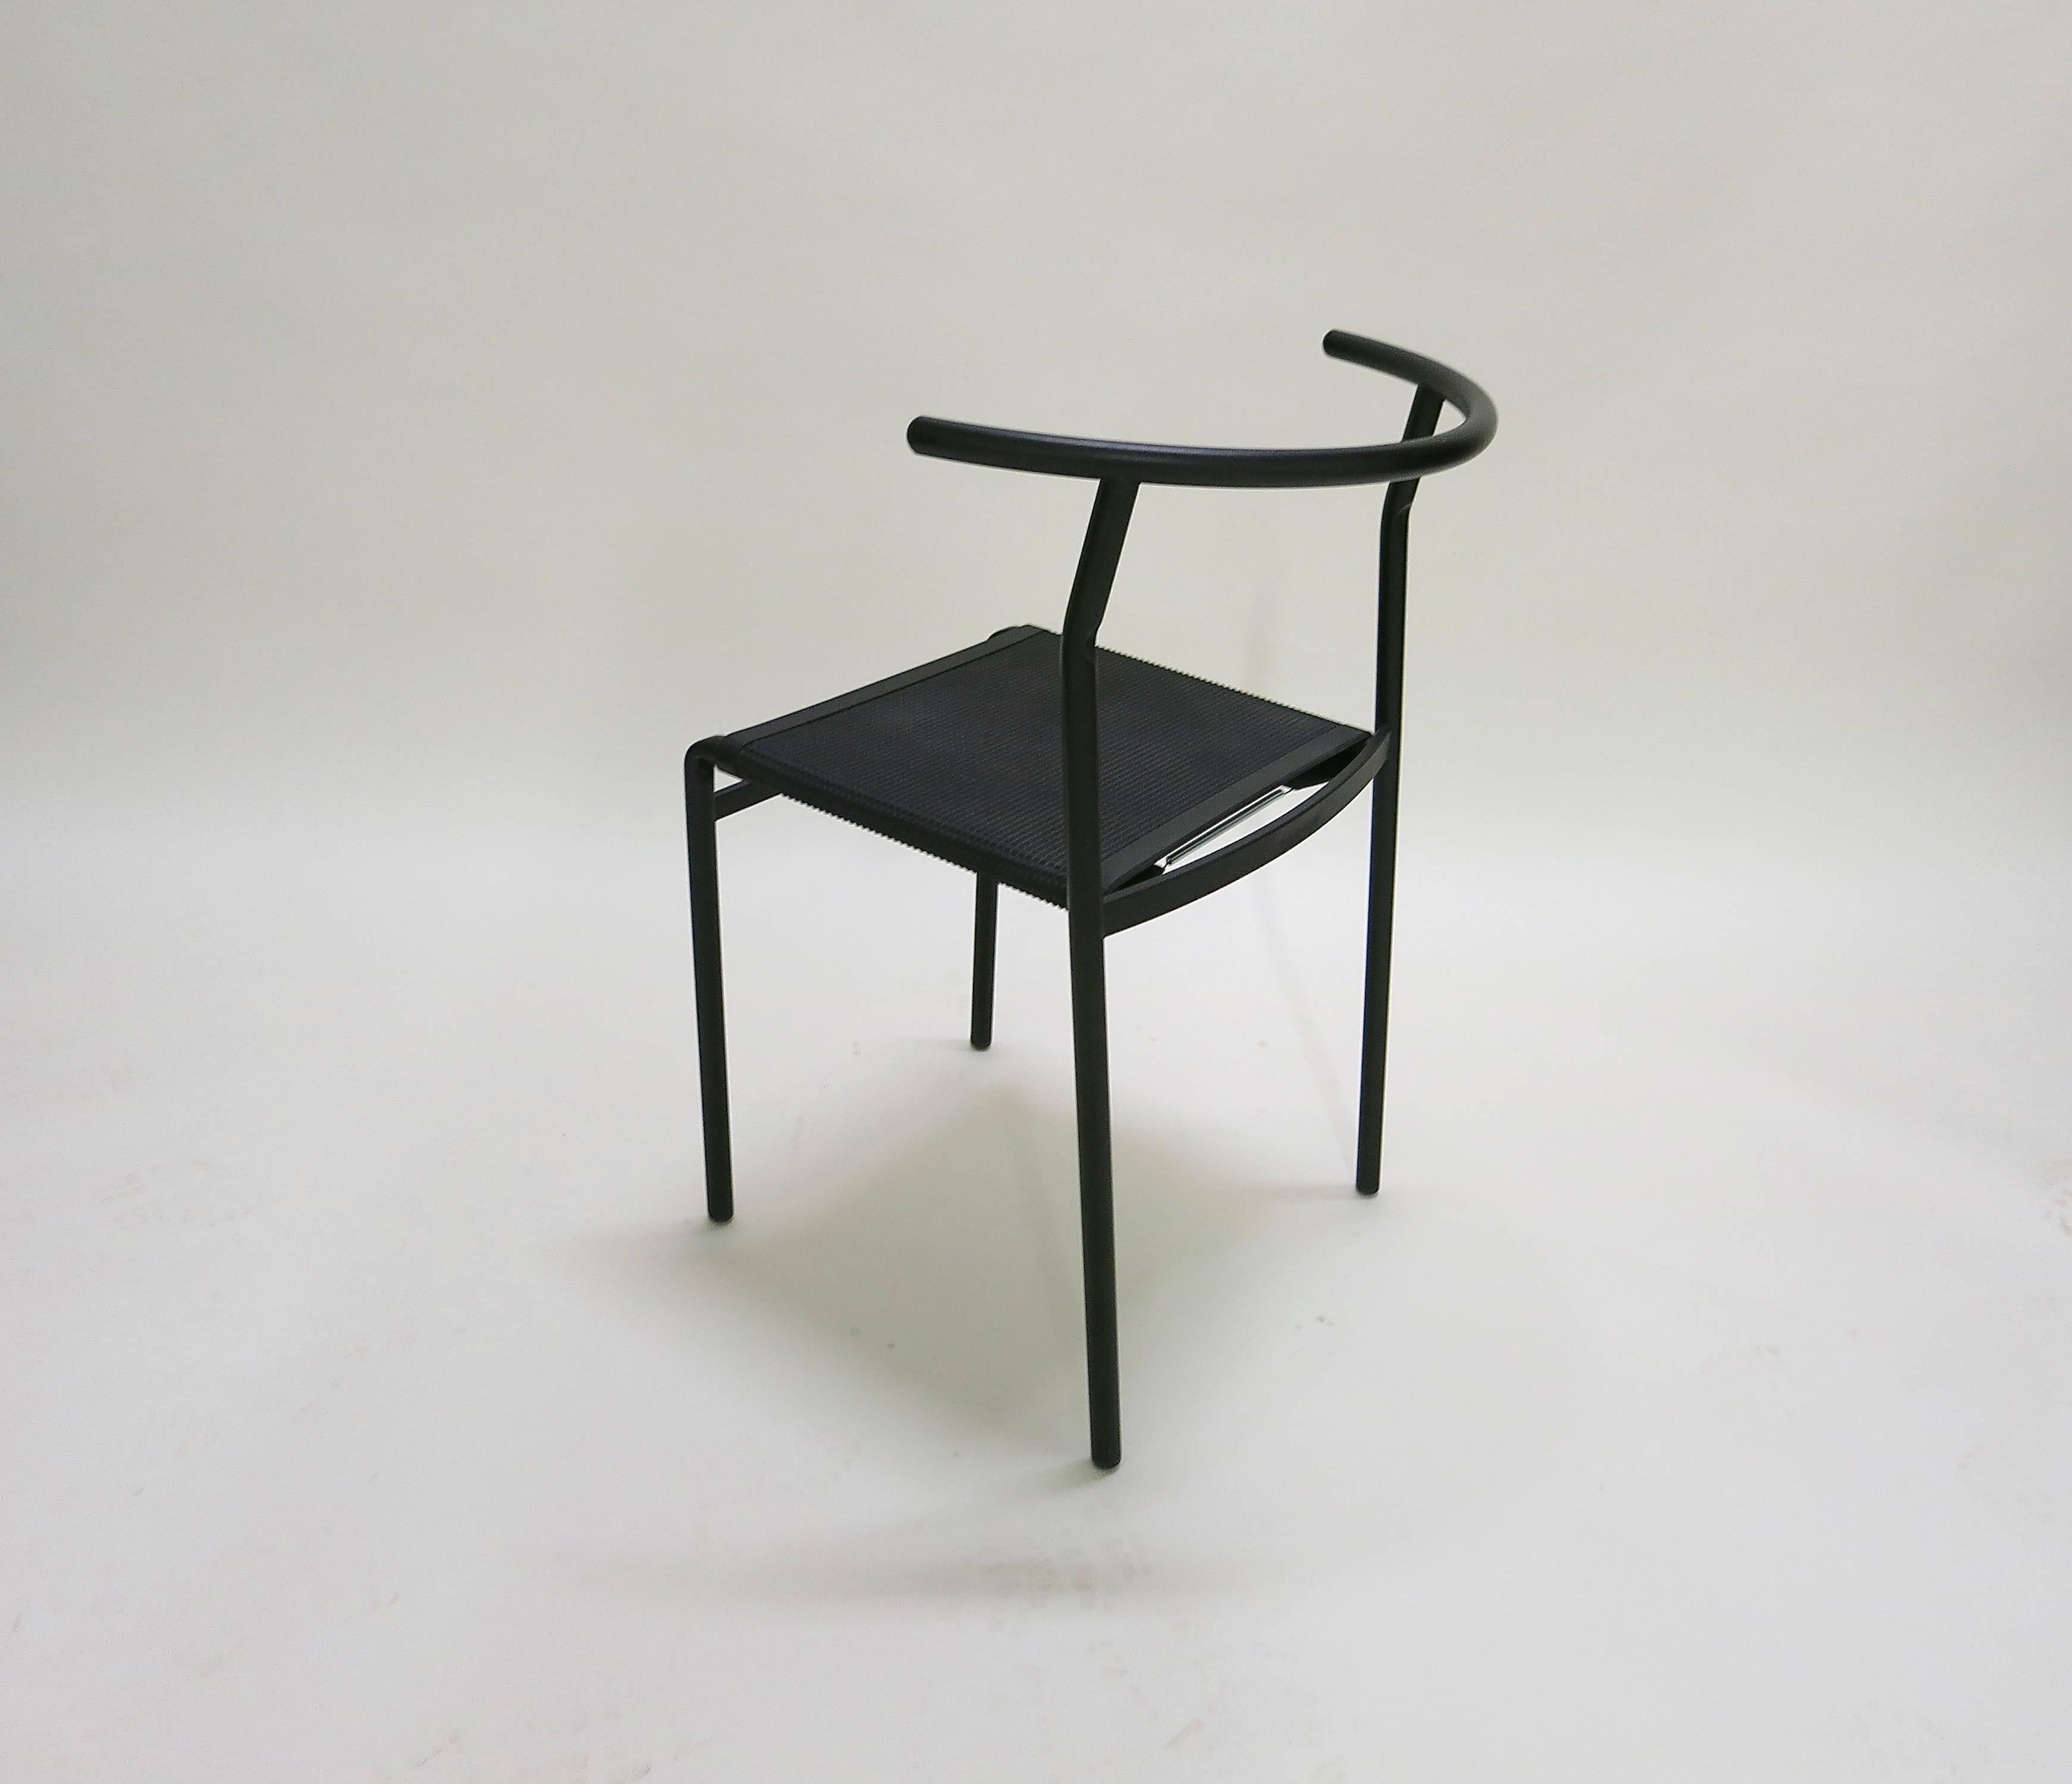 Late 20th Century Pair of Stacking Chairs by Philippe Starck for Baleri, Italy 1984